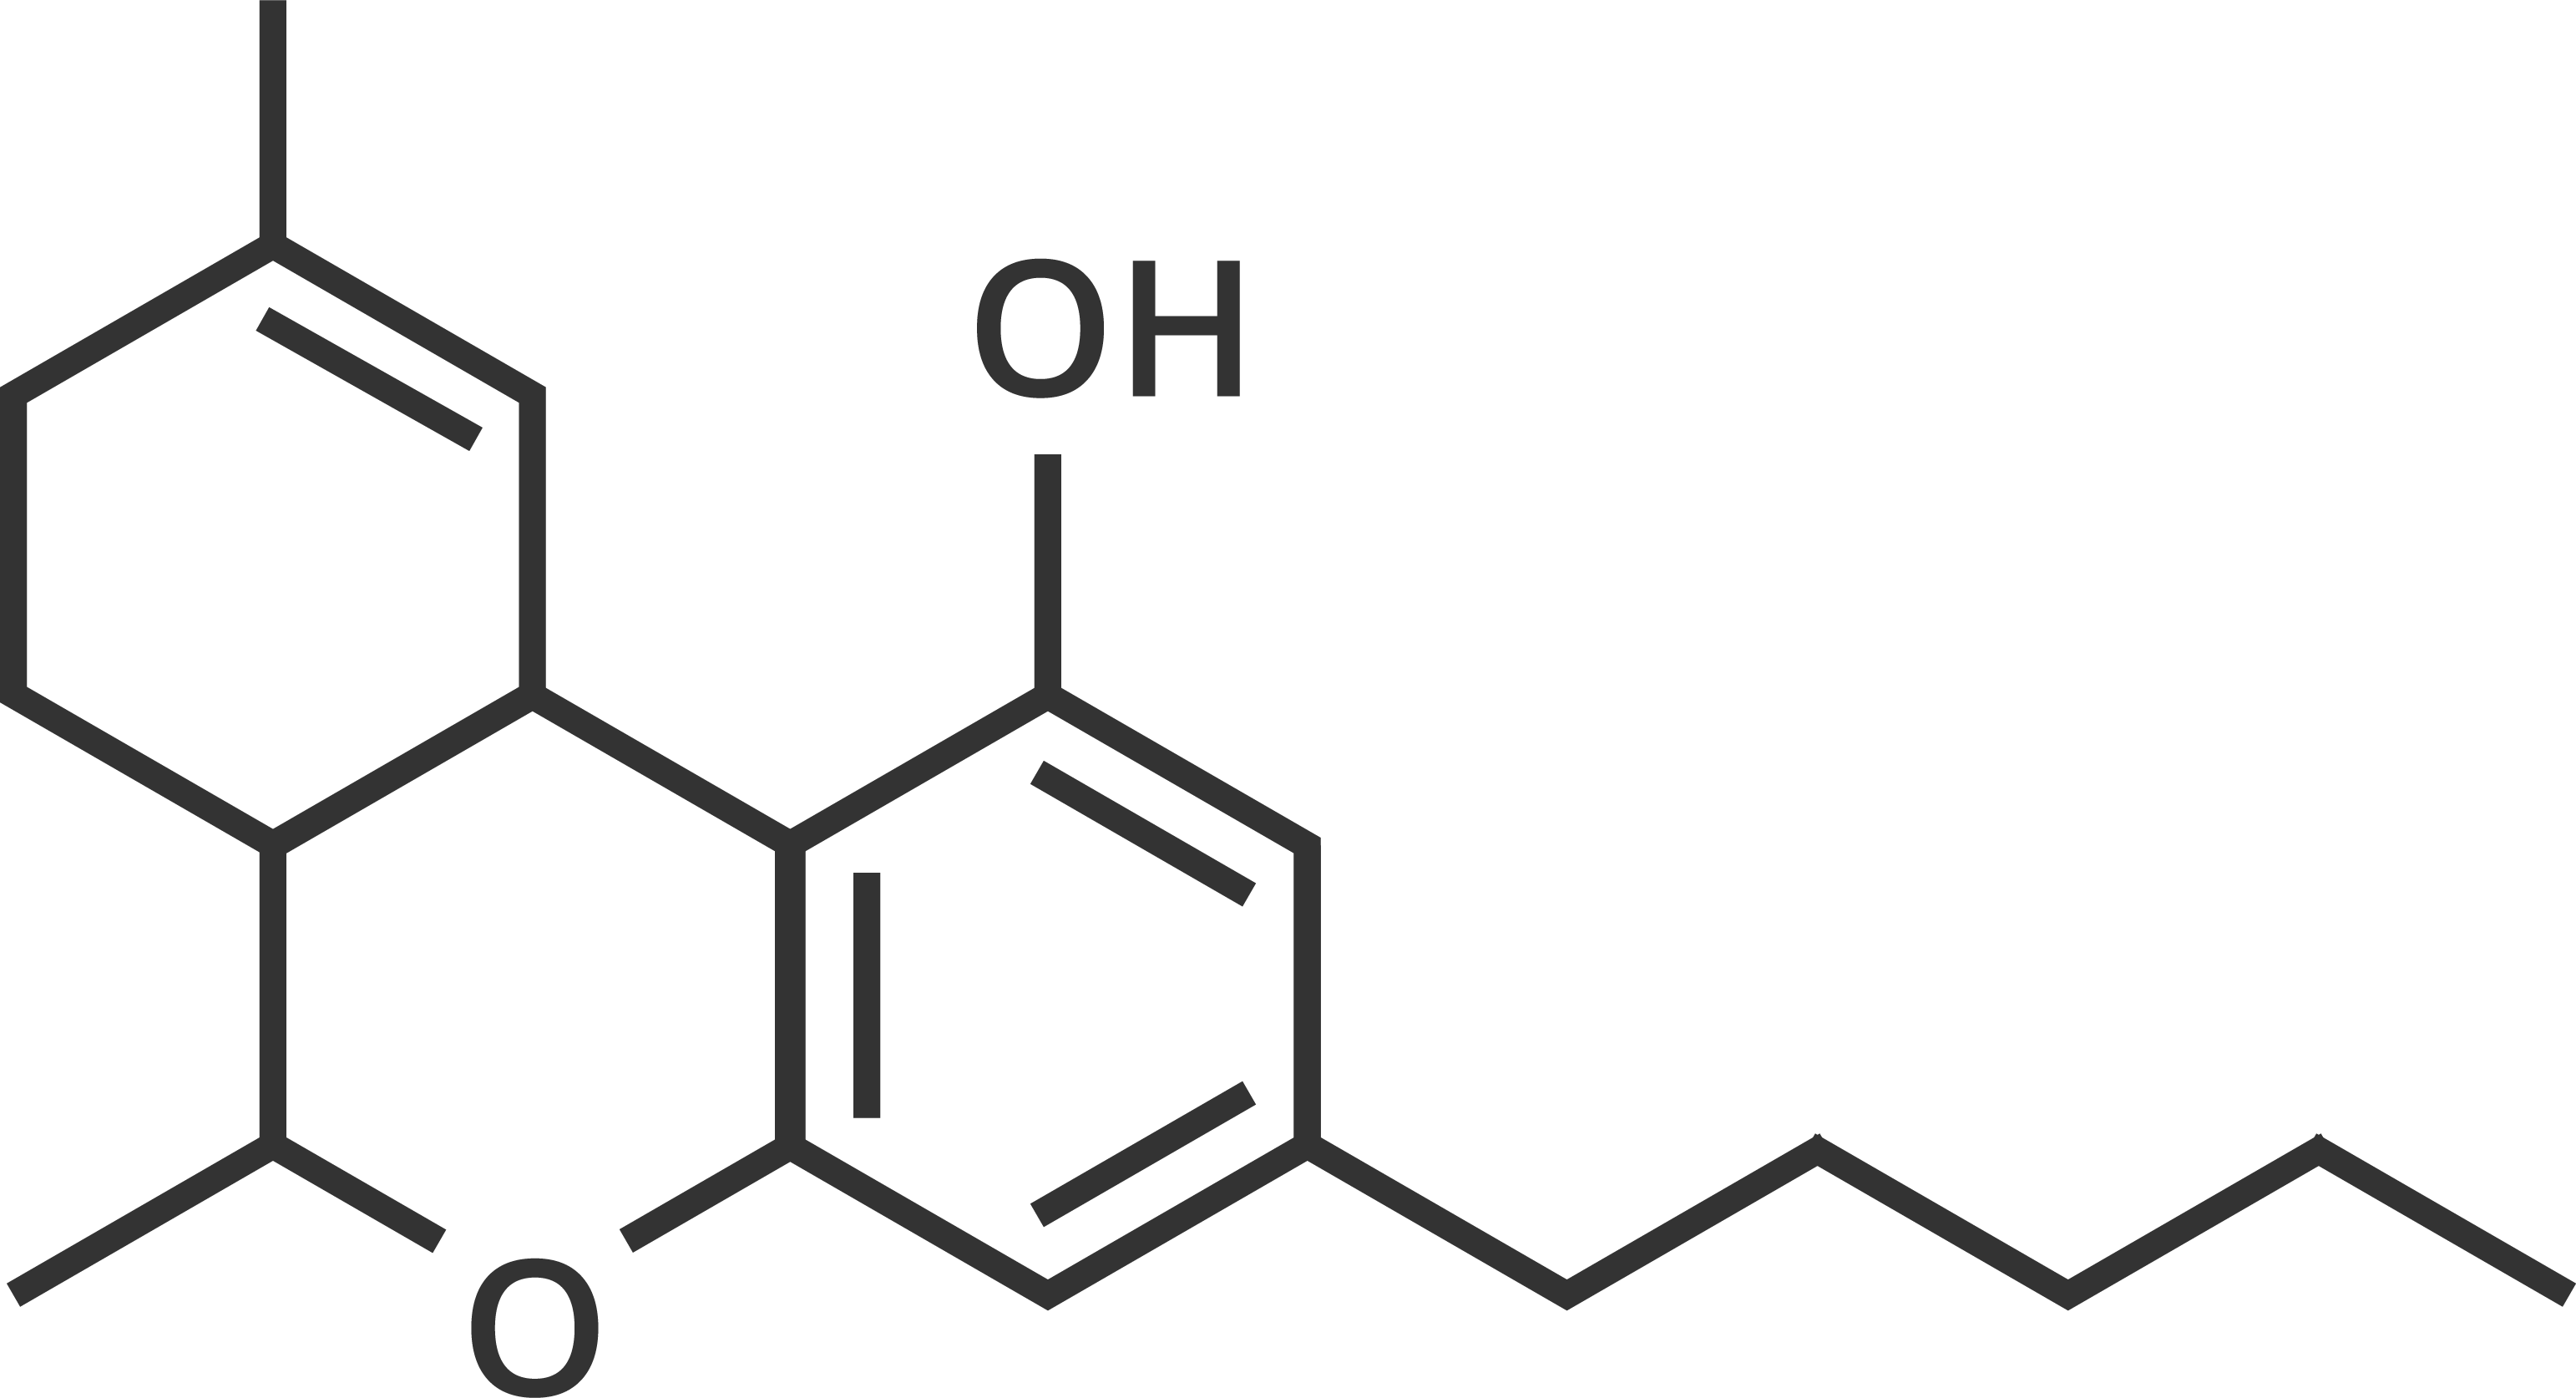 THC Structure